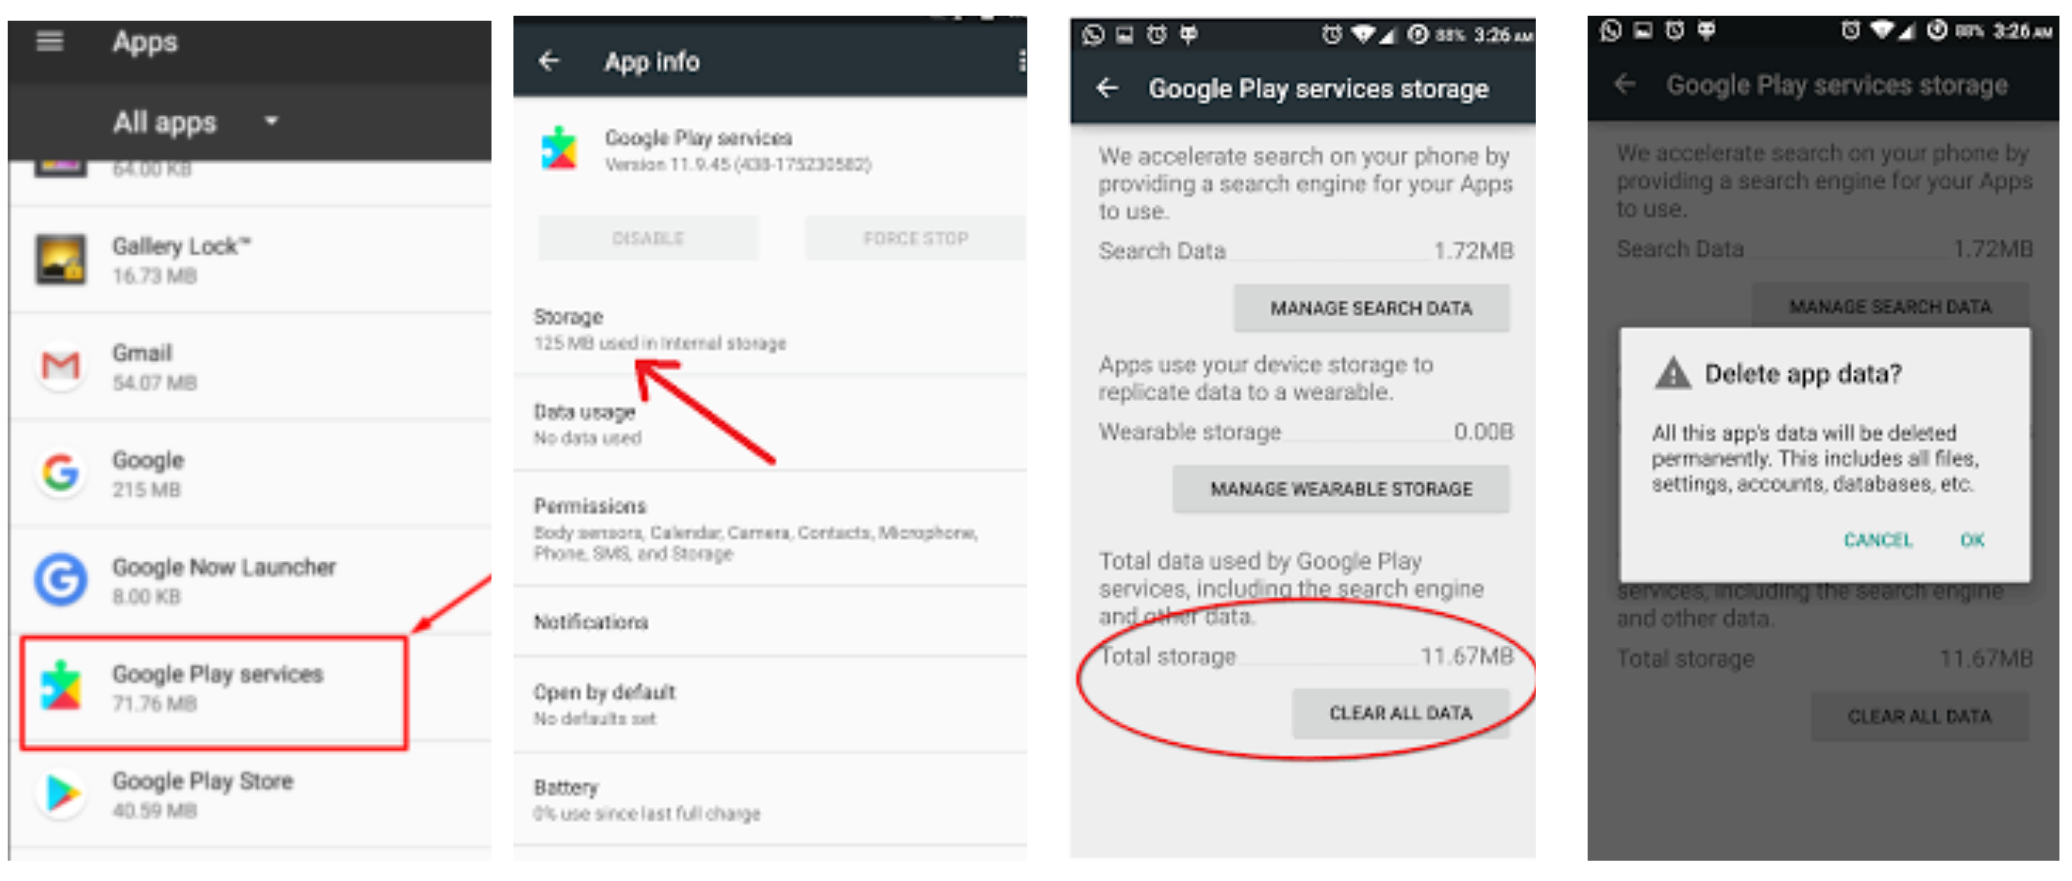 Fix Google Play Services Draining Battery Issue